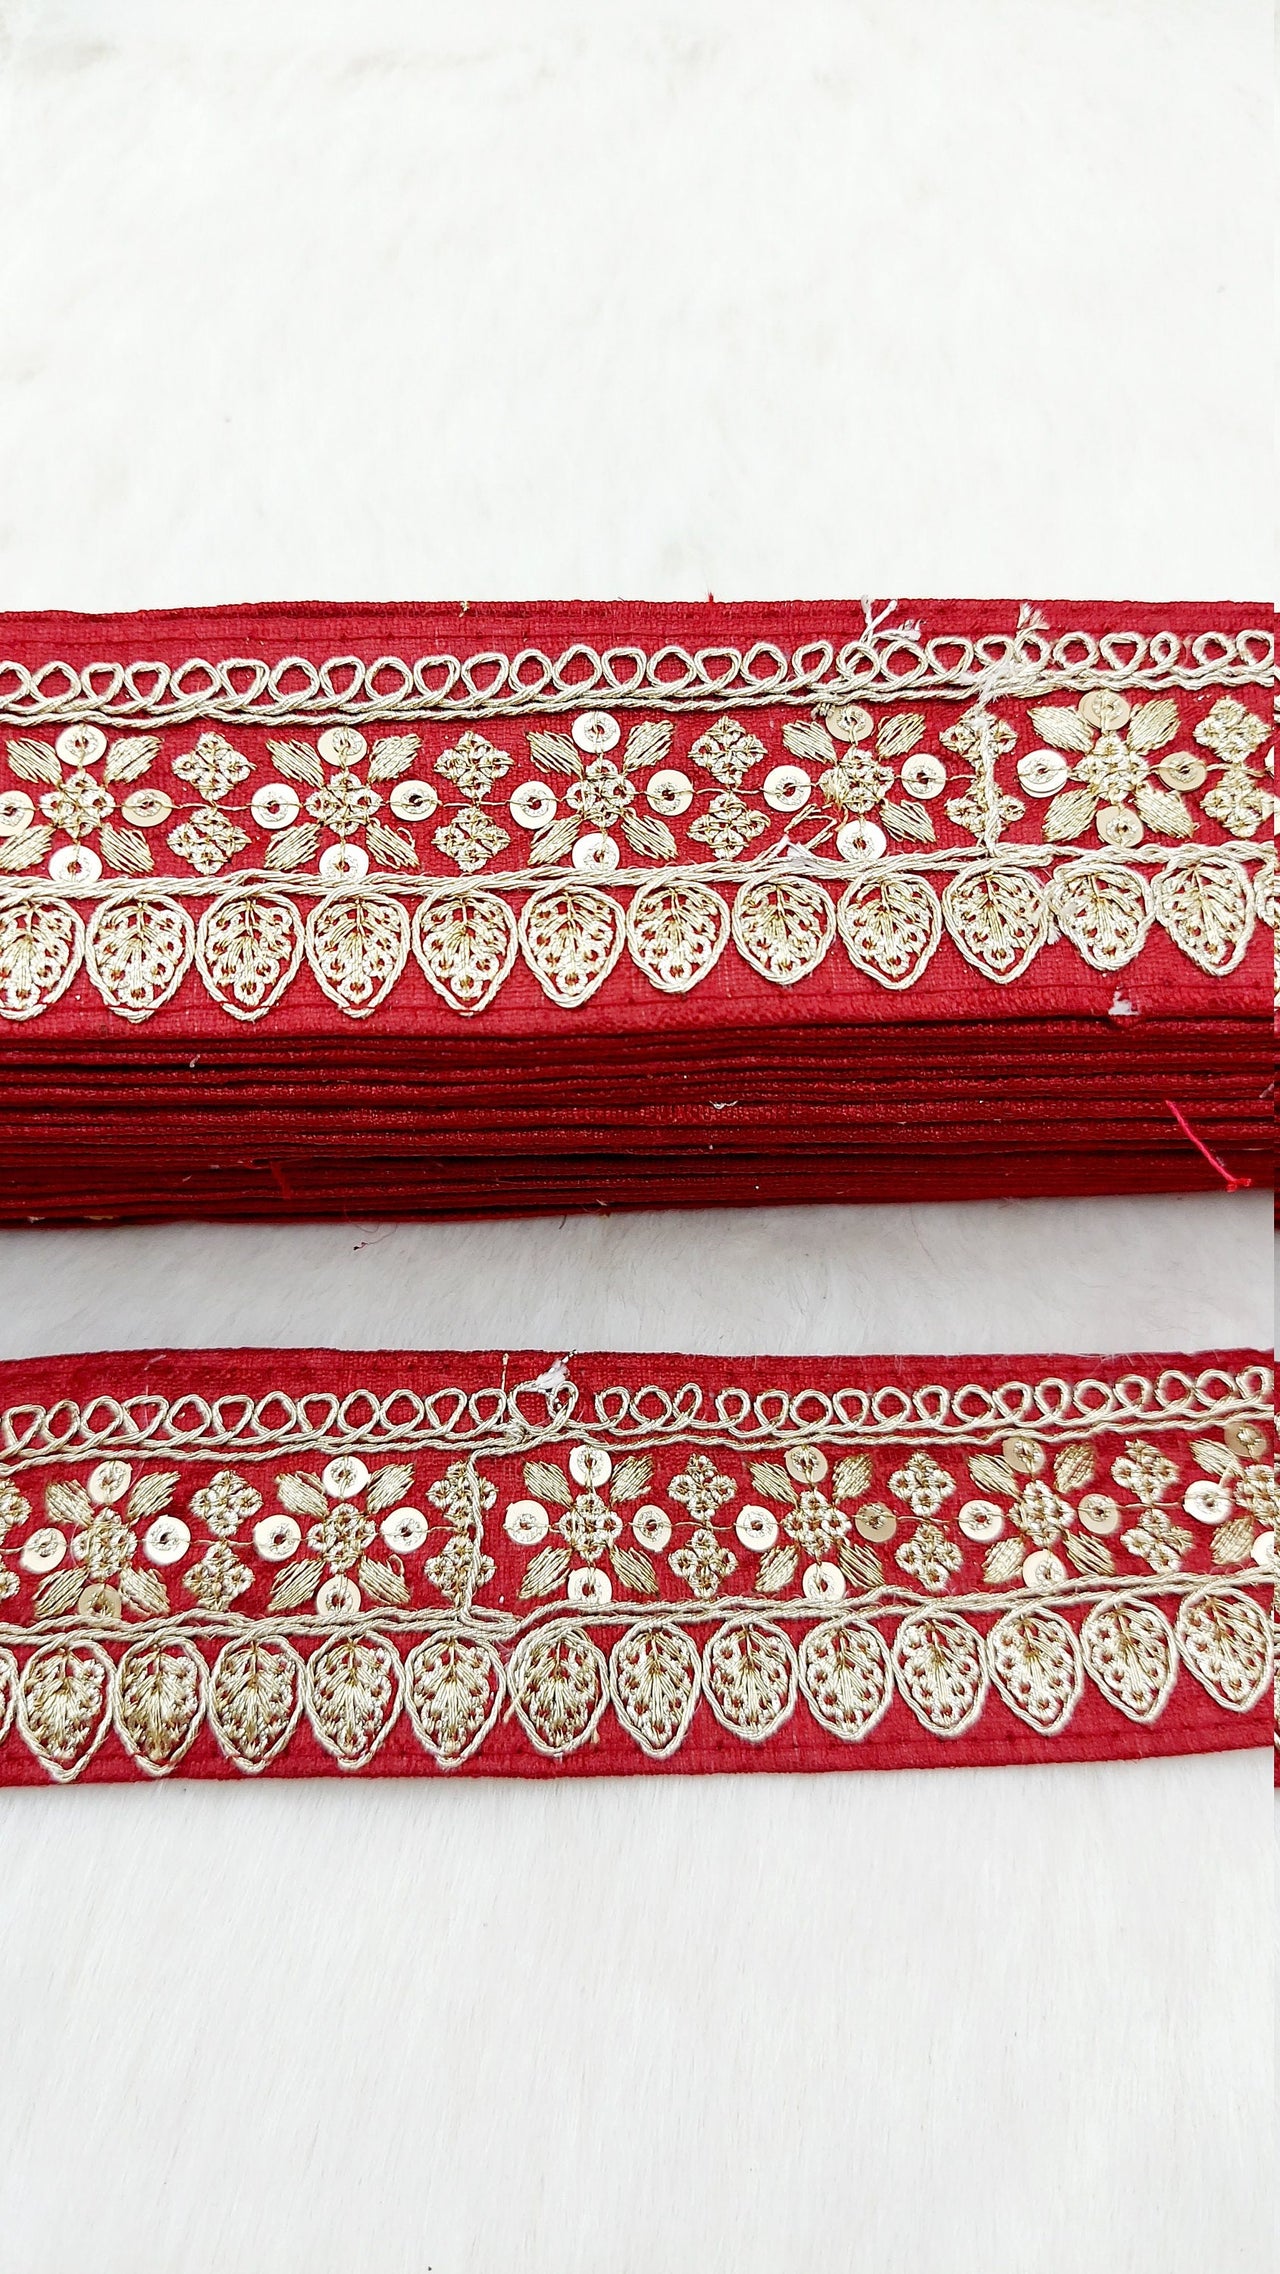 Maroon Red Art Silk Fabric Trim With Gold Floral Embroidery, Floral Sequins Sari Border, Trim By 9 Yards